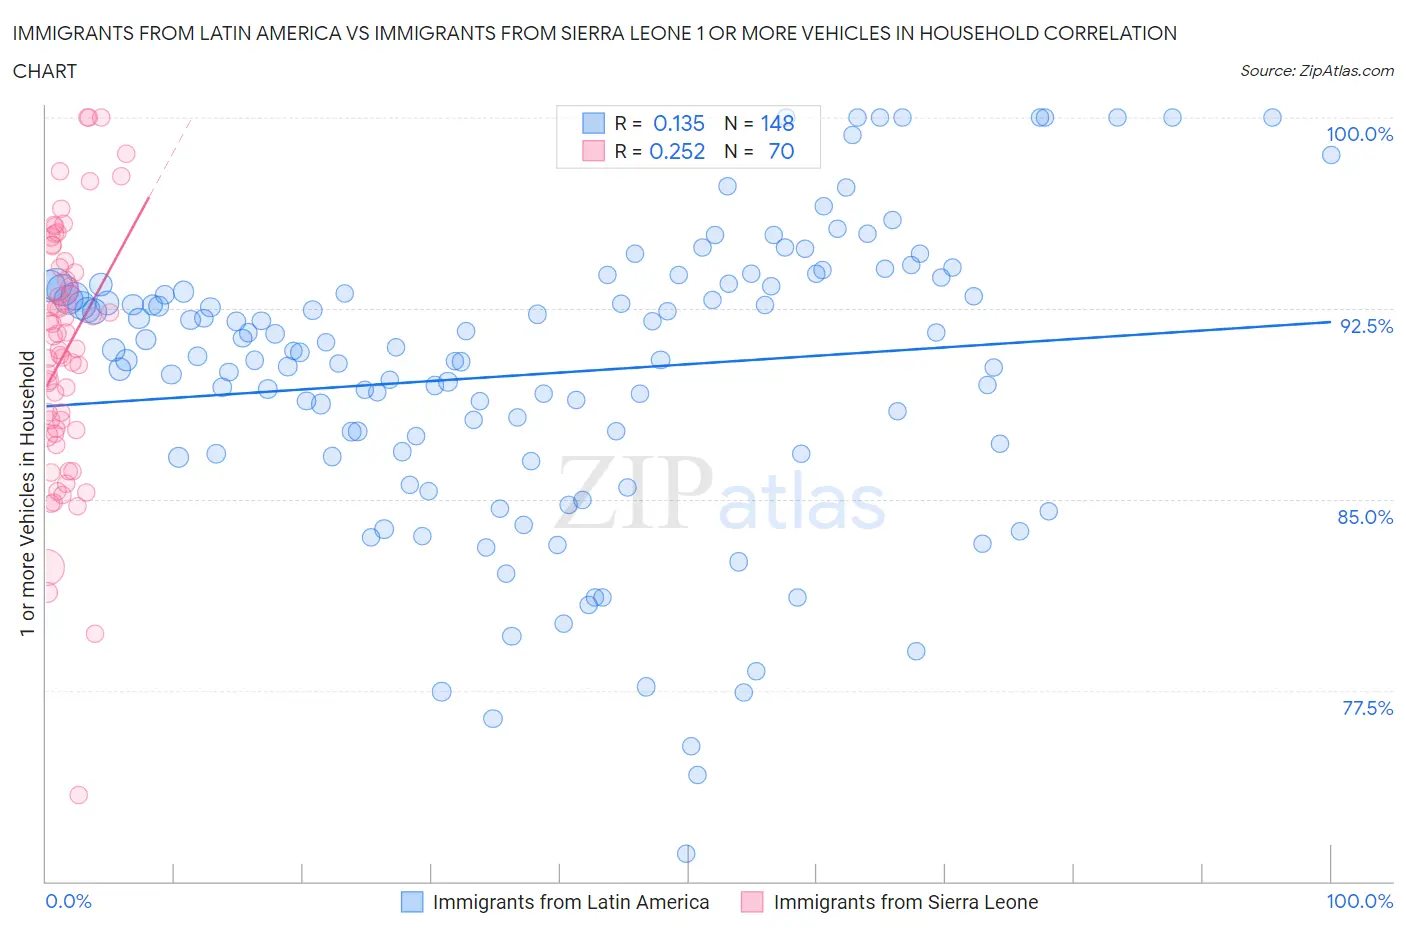 Immigrants from Latin America vs Immigrants from Sierra Leone 1 or more Vehicles in Household